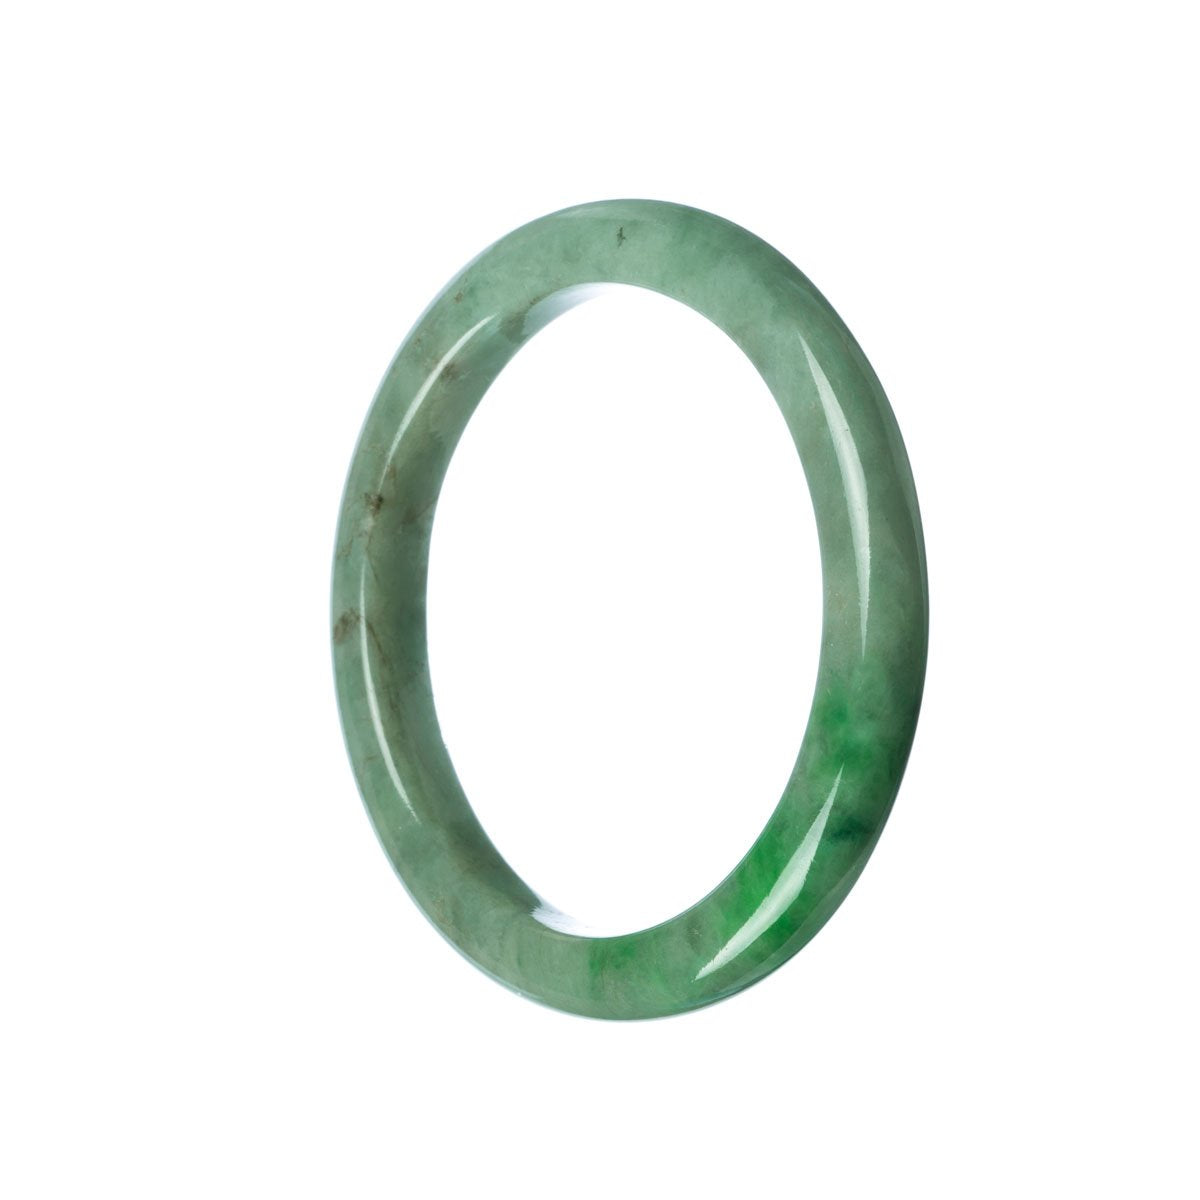 A stunning bracelet made from real Grade A Green Burma Jade, featuring a 58mm semi-round shape. Perfect for adding a touch of elegance to any outfit.